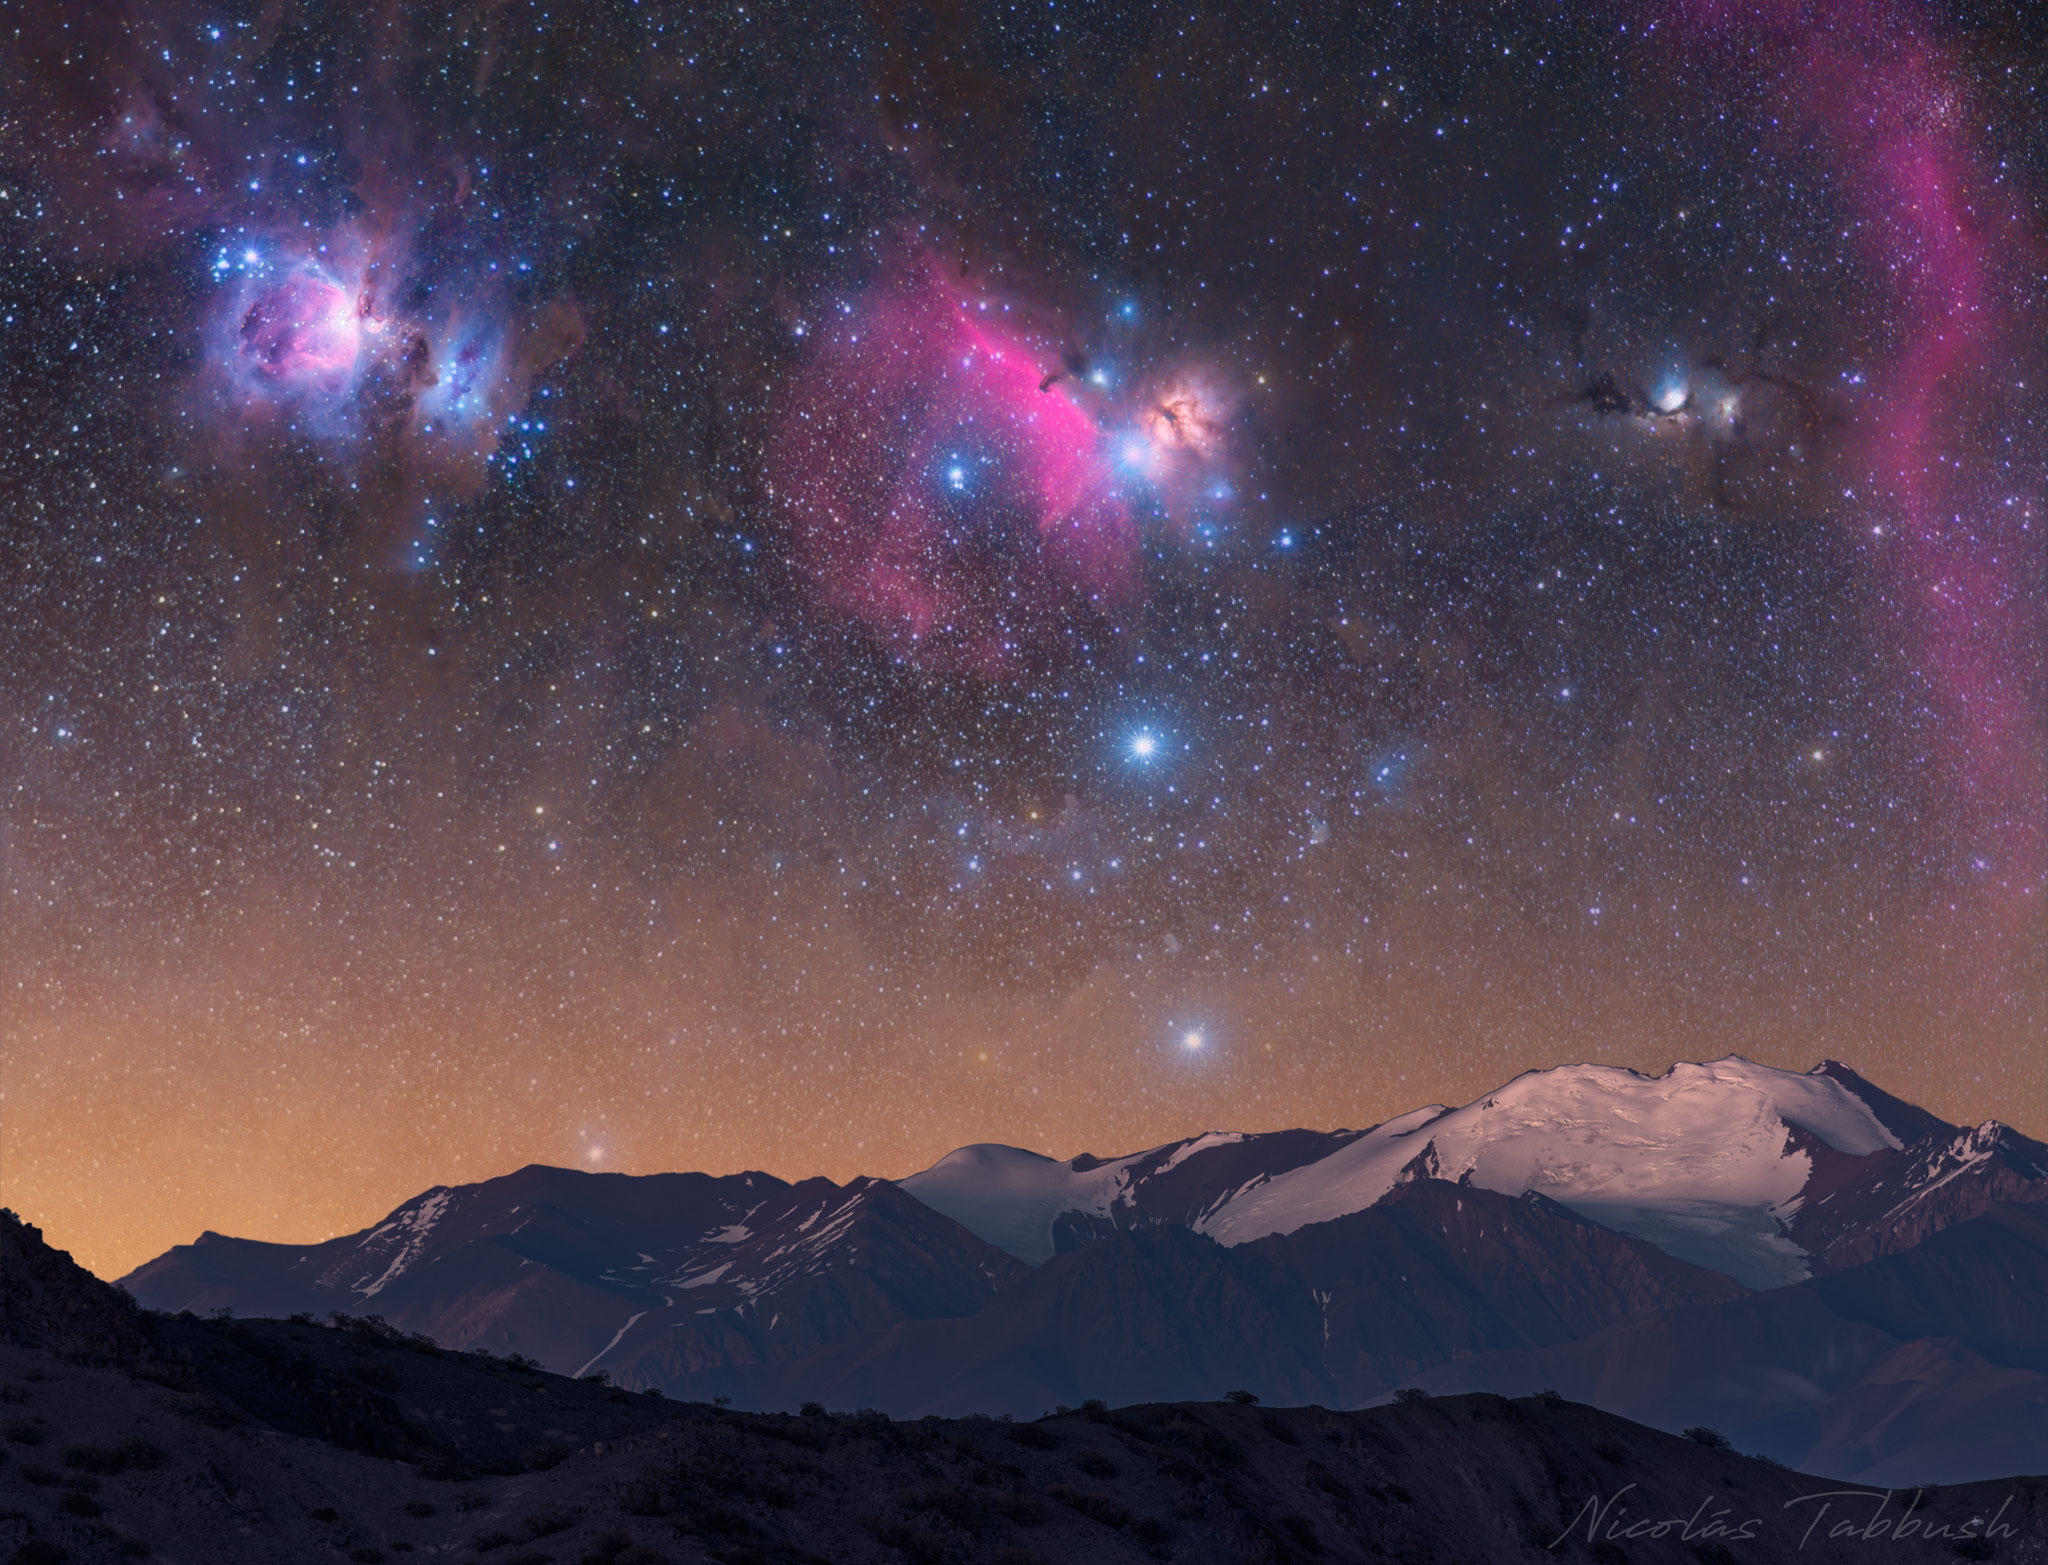 Apod June 9 Orion Over Argentine Mountains